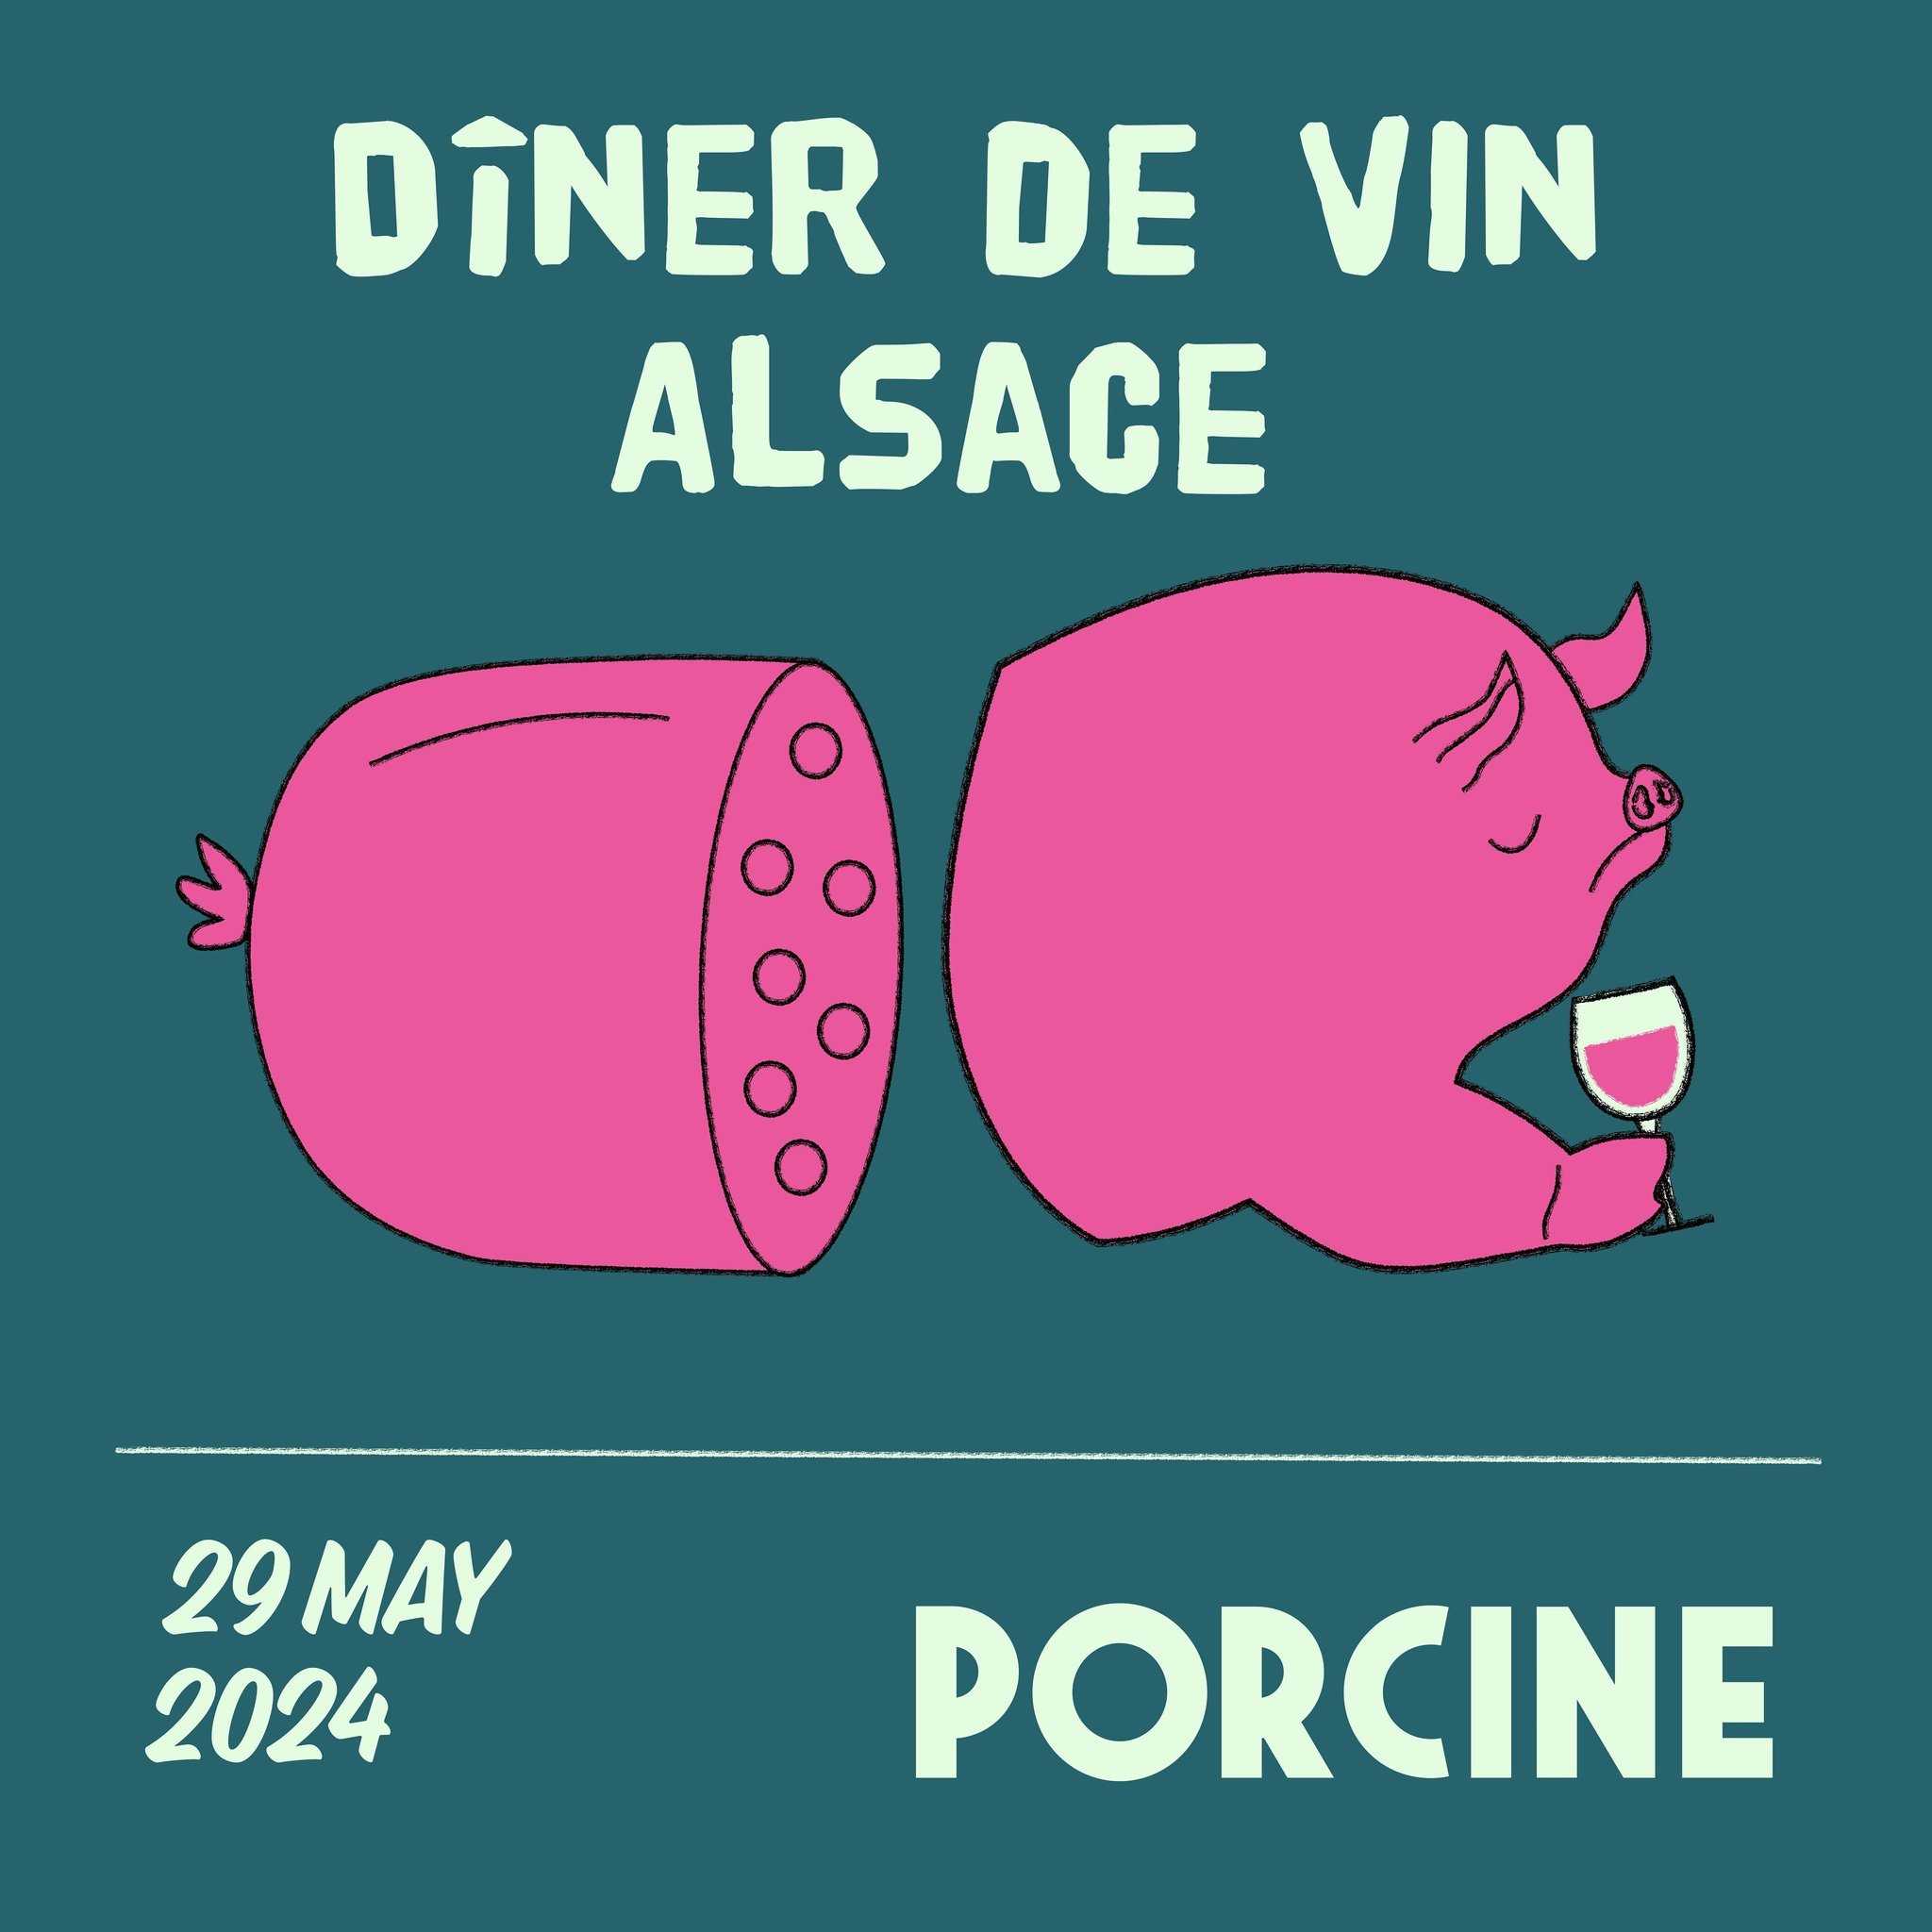 D&icirc;ner de Vin: Alsace 

On Wednesday the 29th of May we will be hosting the first dinner of a very special series. 

Our dear friend Charlie Simpson of Virtuous Vine will be joining us and bringing the &ldquo;vin&rdquo; to celebrate the food and